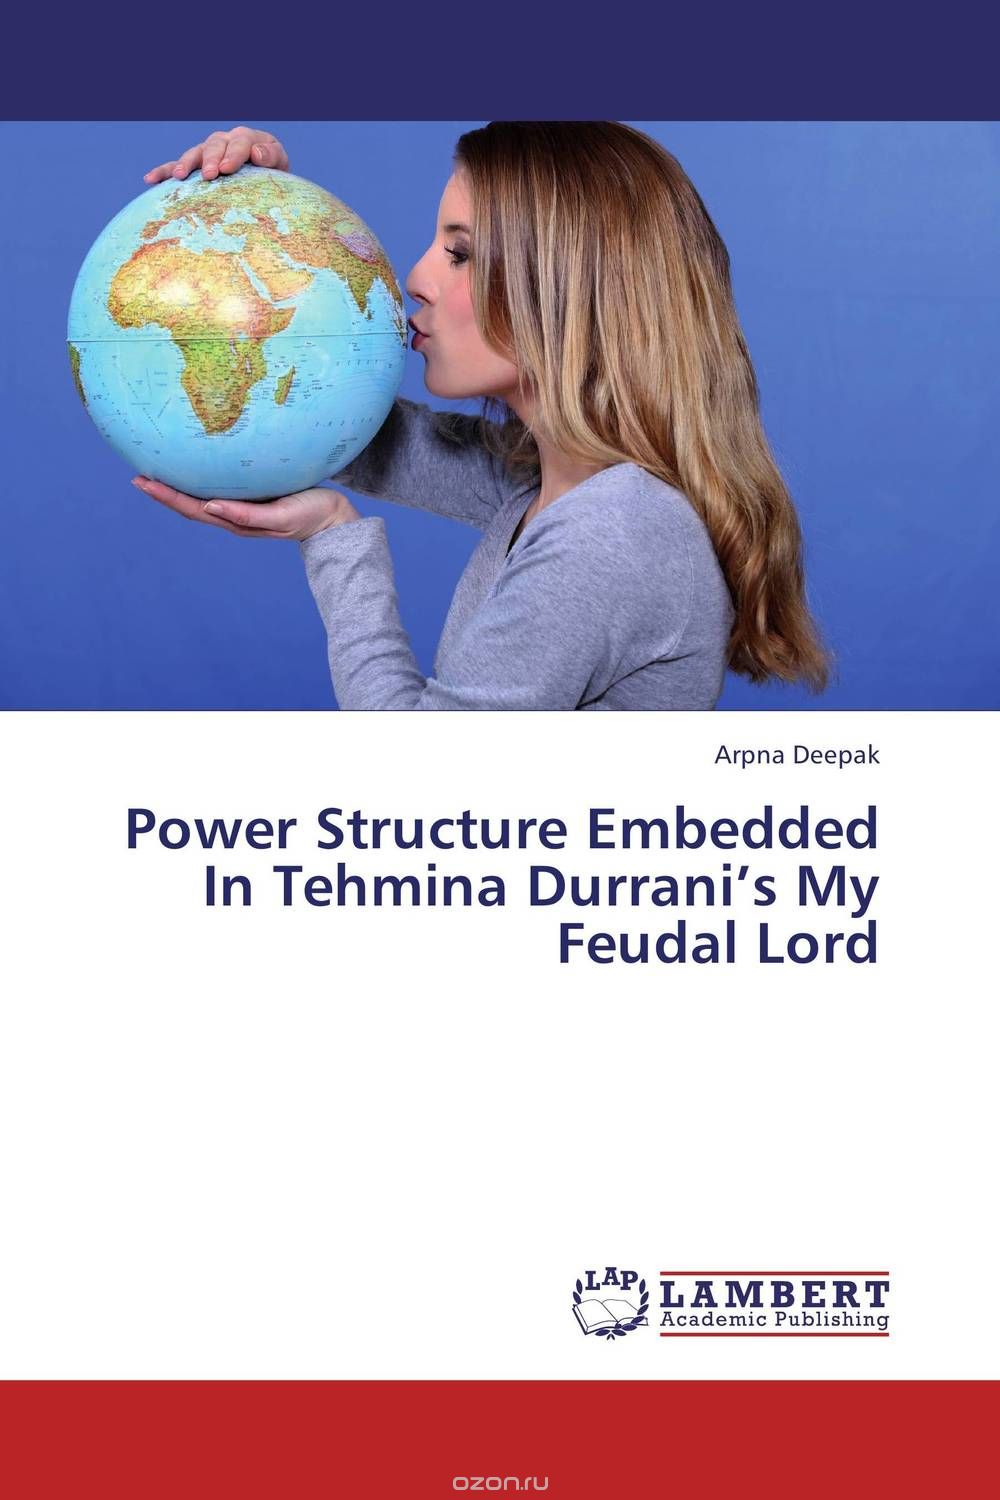 Скачать книгу "Power Structure Embedded In Tehmina Durrani’s My Feudal Lord"